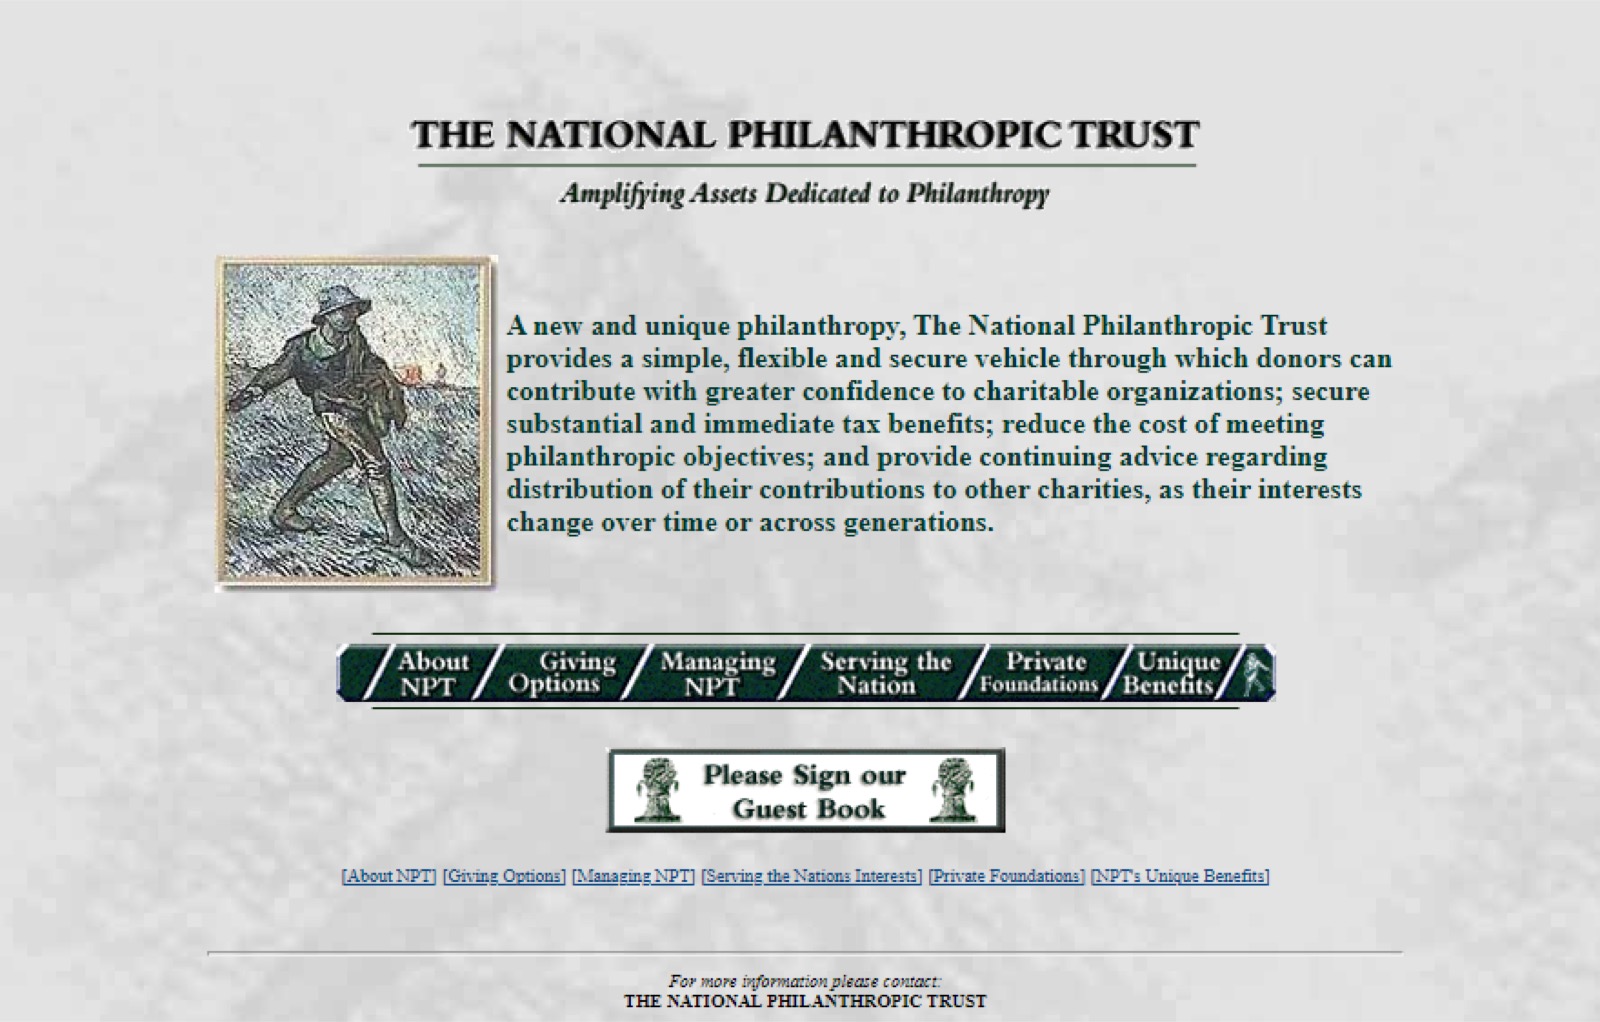 The front page of National Philanthropic Trust’s legacy website featuring the organization’s mission statement and listing the services NPT offers.